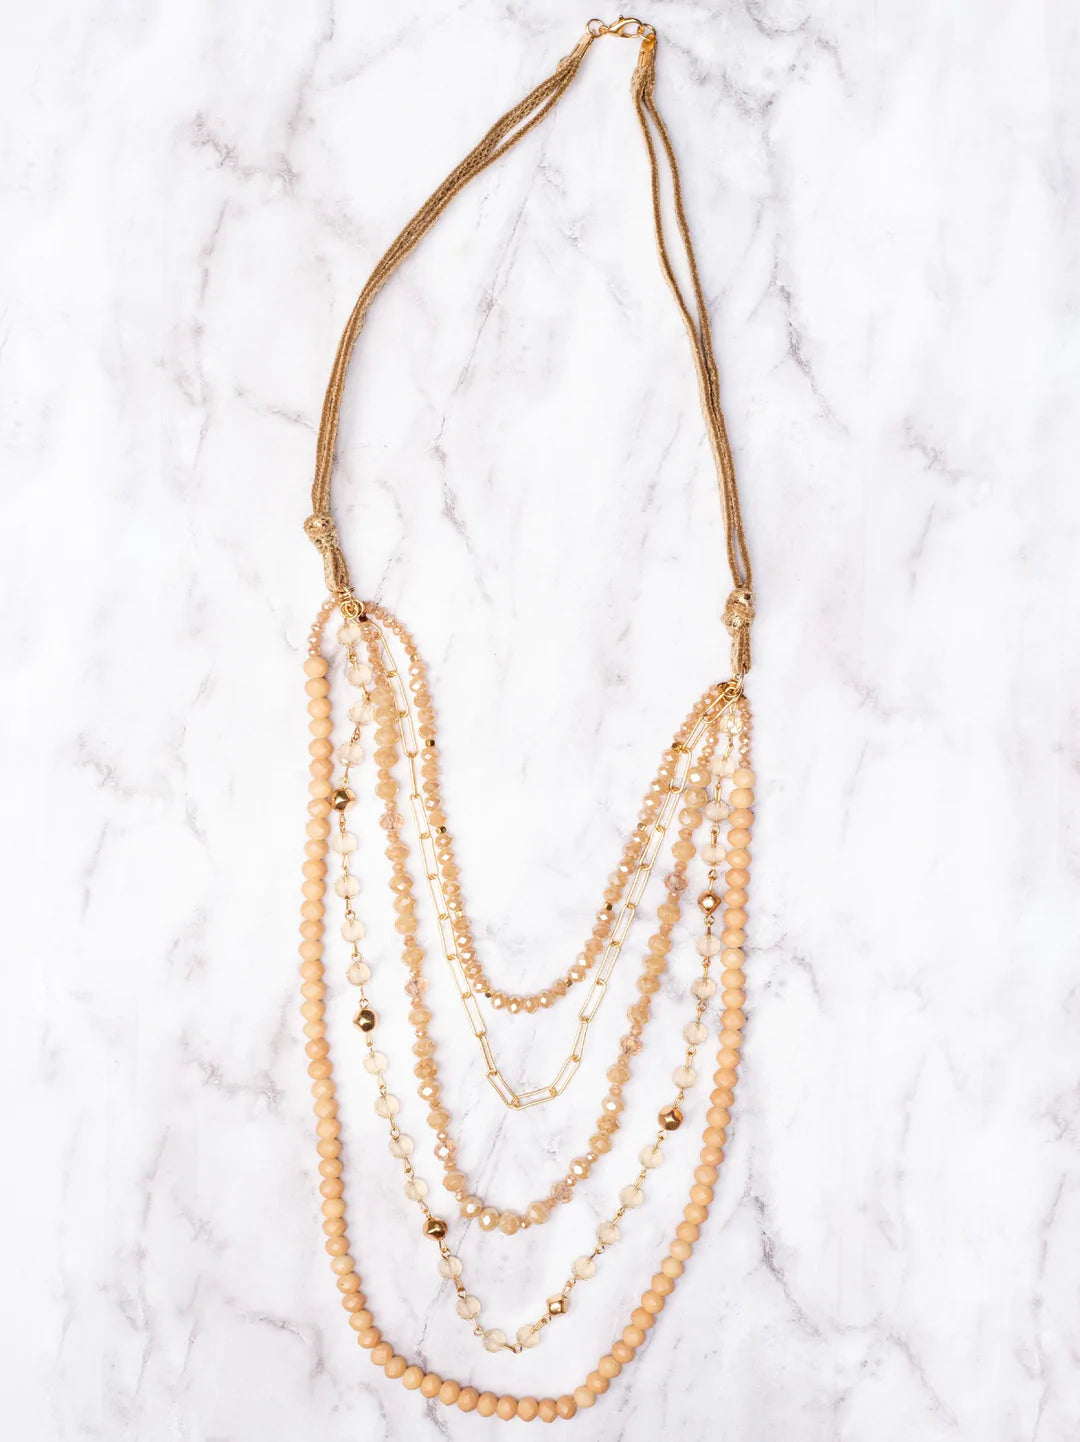 Only In Miami Mixed Beads Layered Necklace